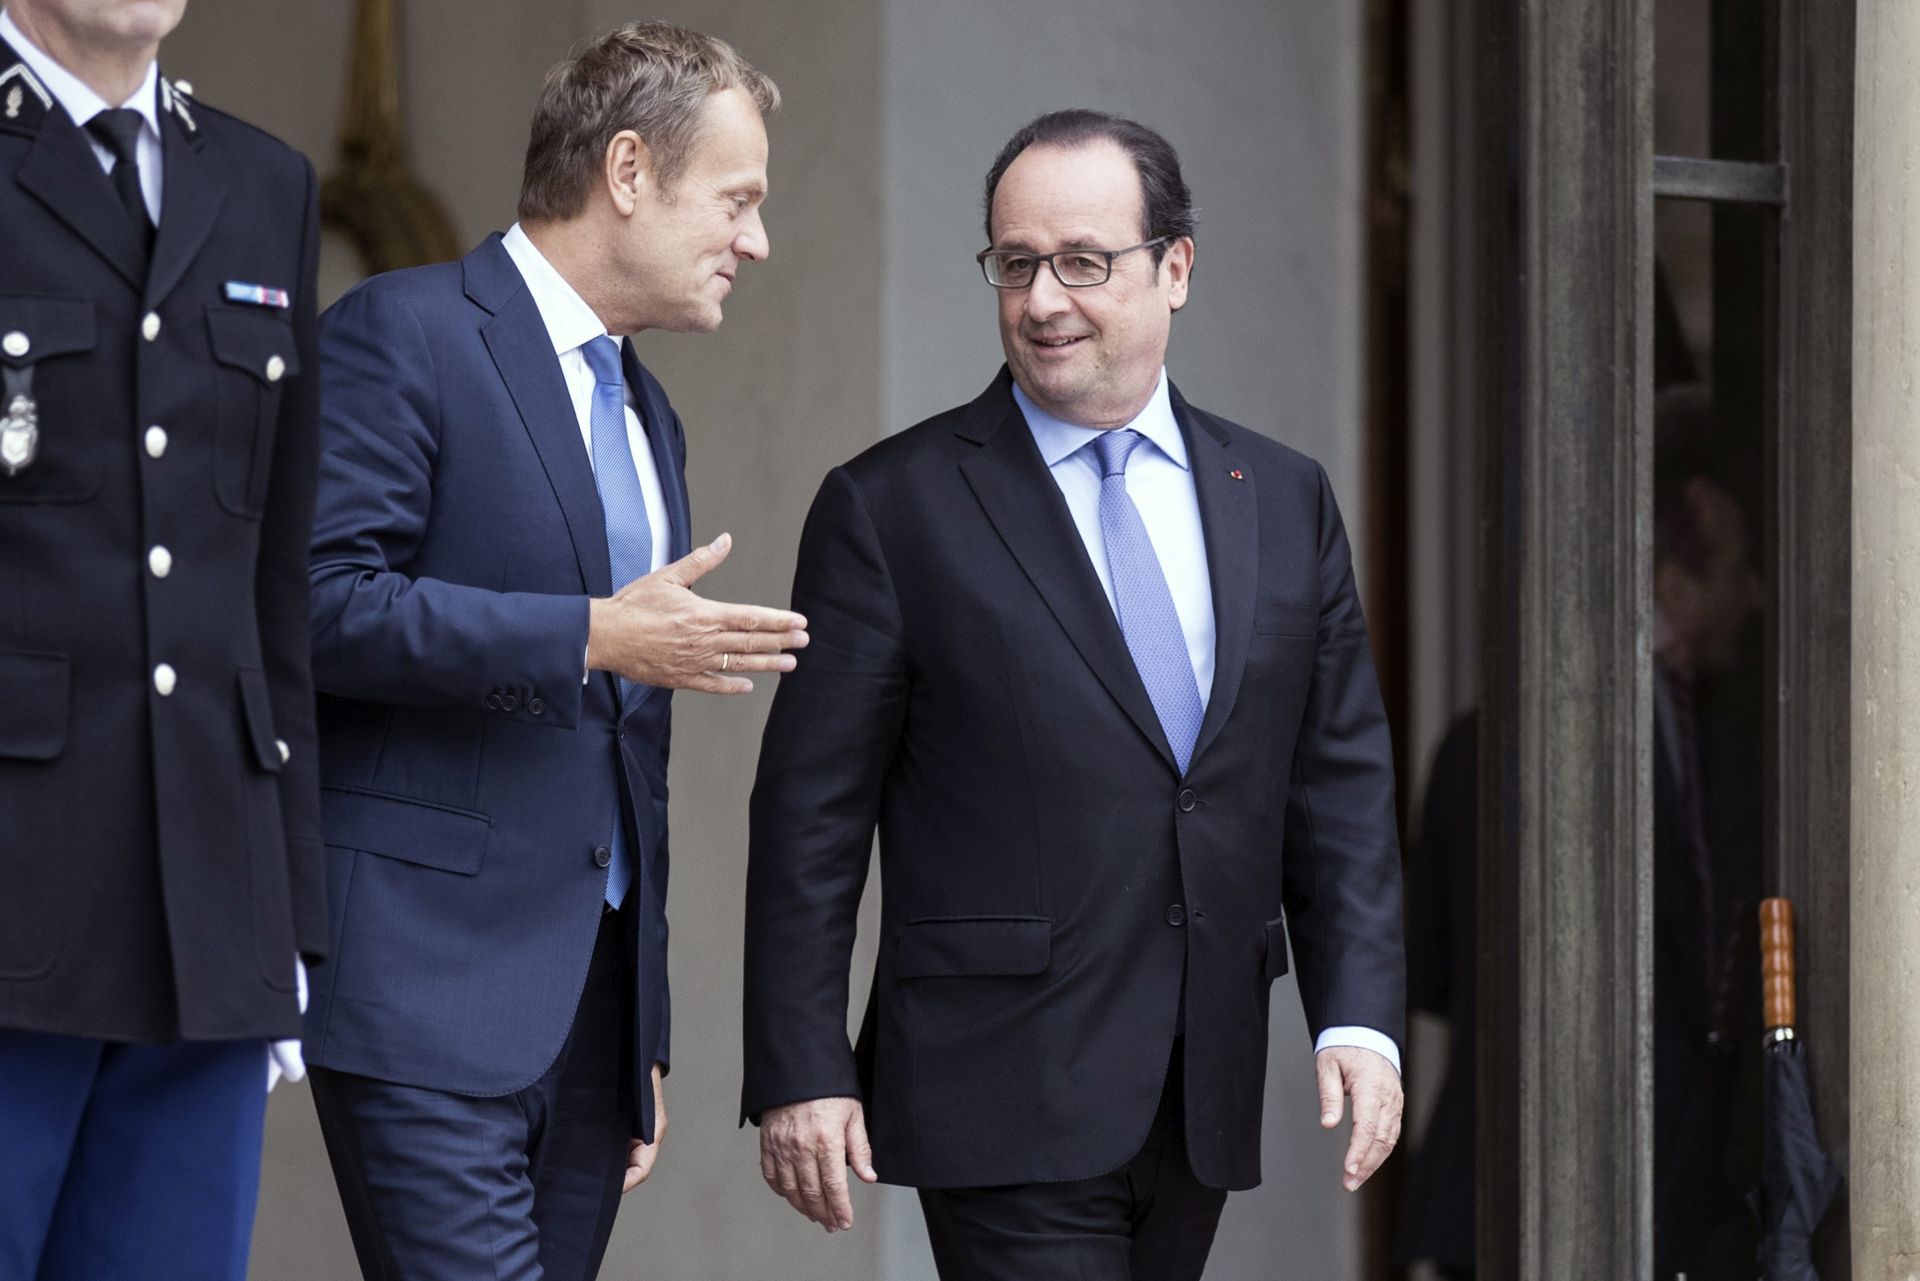 epa05393916 French President Francois Hollande (R) escorts European Council president Donald Tusk (L) after a meeting at the Elysee Palace in Paris, France, 27 June 2016. French President Francois Hollande will meet with Italian Prime Minister Mateo Renzi and German Chancellor Angela Merkel later this afternoon in Berlin to discuss their positions in the aftermath of the British EU referendum. Britons in a referendum on 23 June have voted by a narrow margin to leave the European Union (EU).  EPA/ETIENNE LAURENT